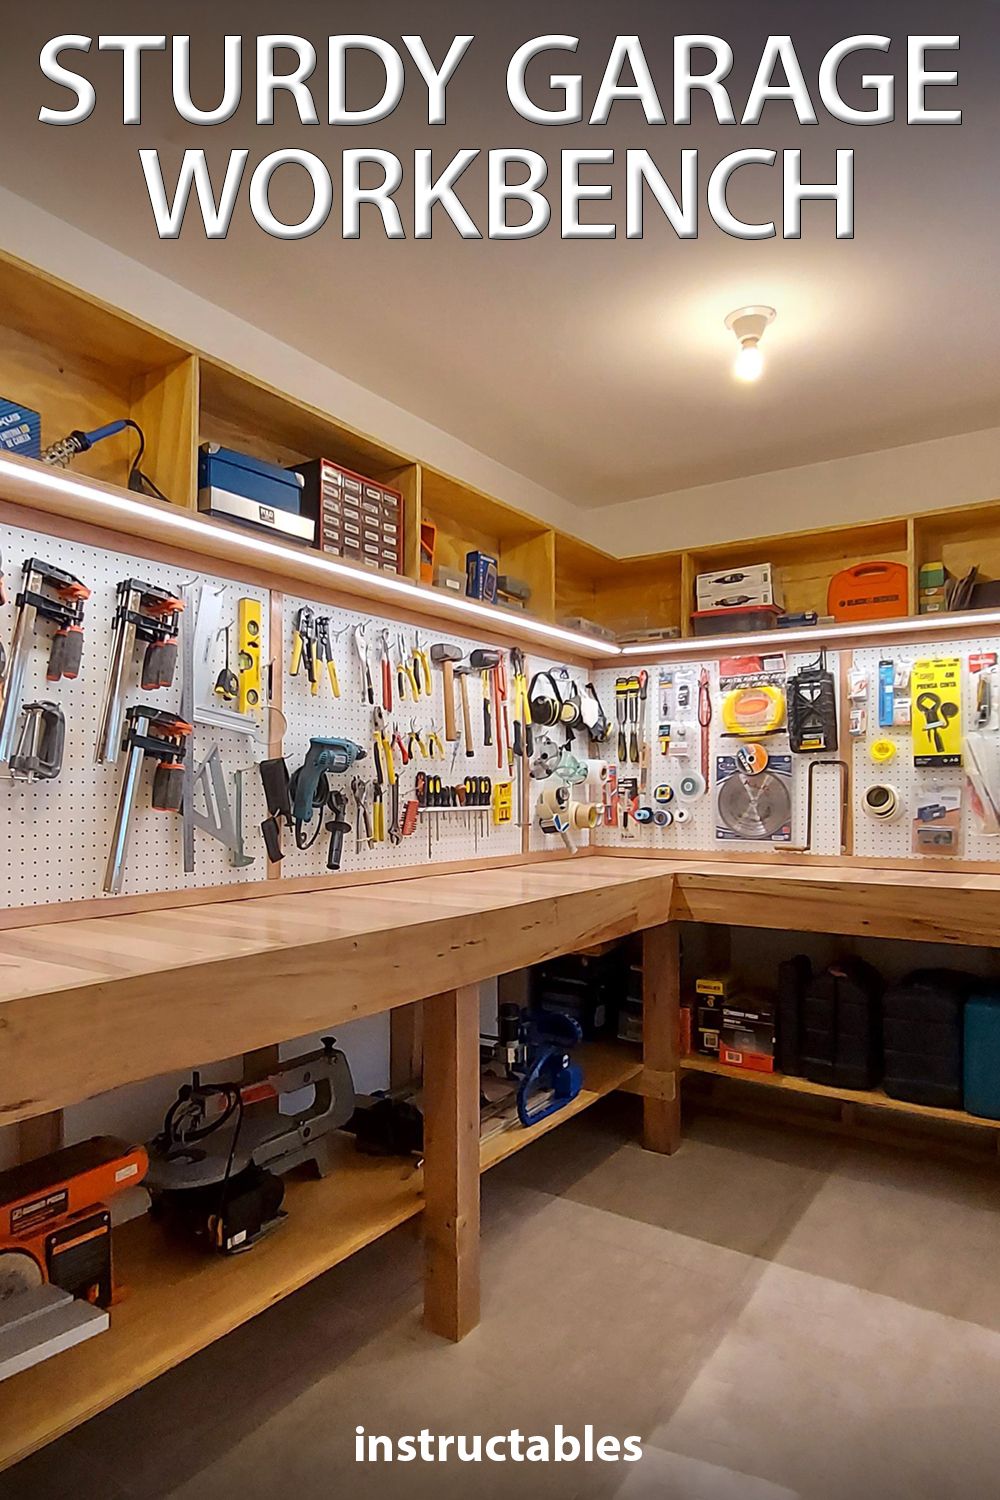 Keep your tools safe and secured in the
  tool storage box